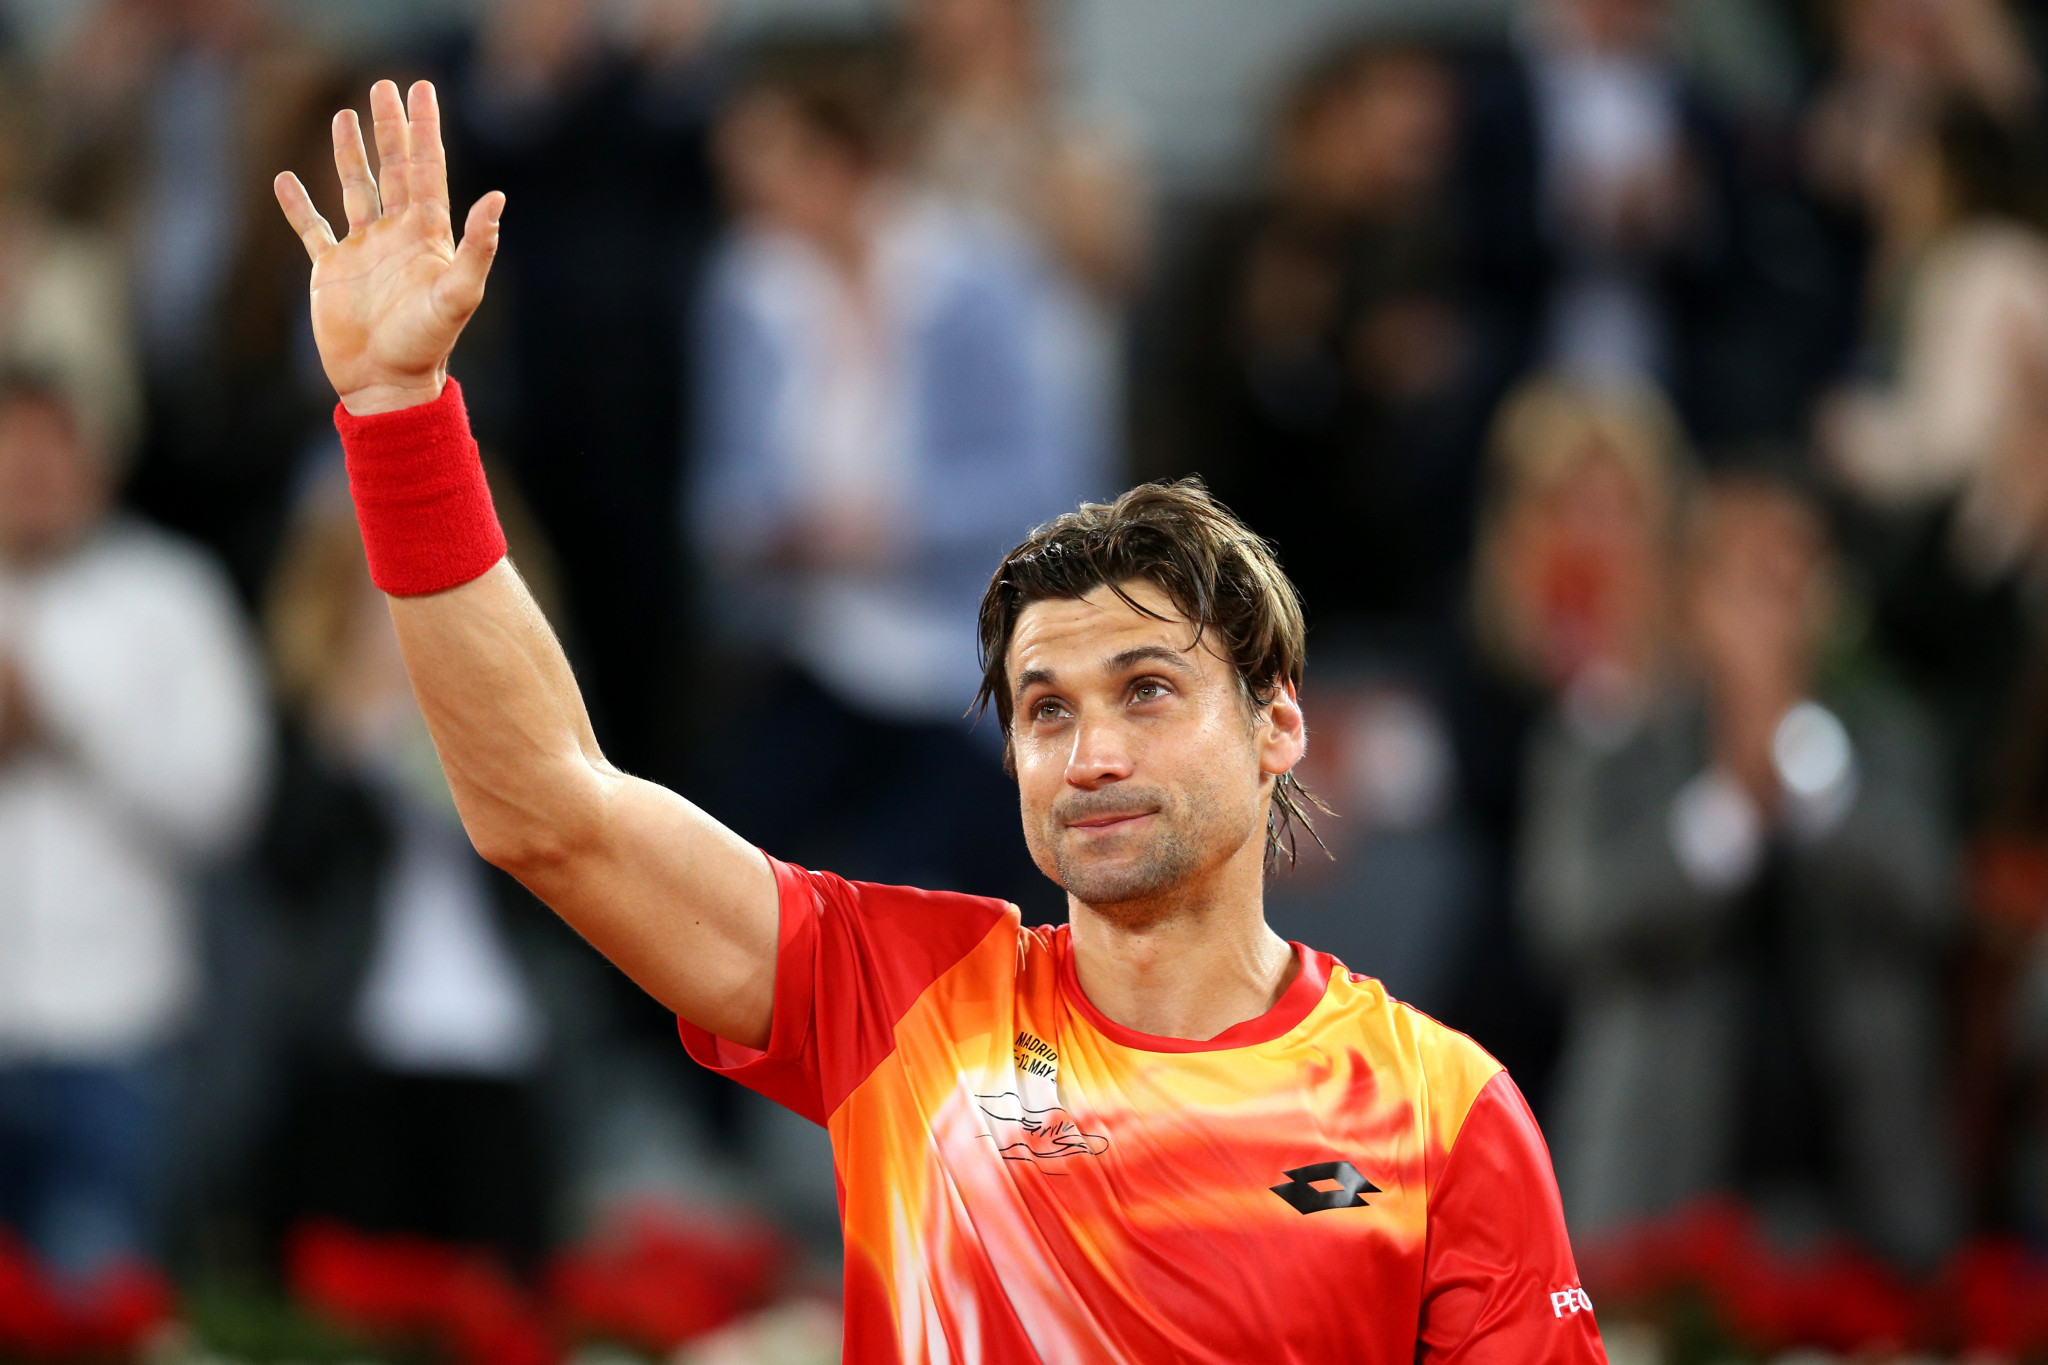 David Ferrer has been appointed as tournament director for the Davis Cup Finals ©Getty Images